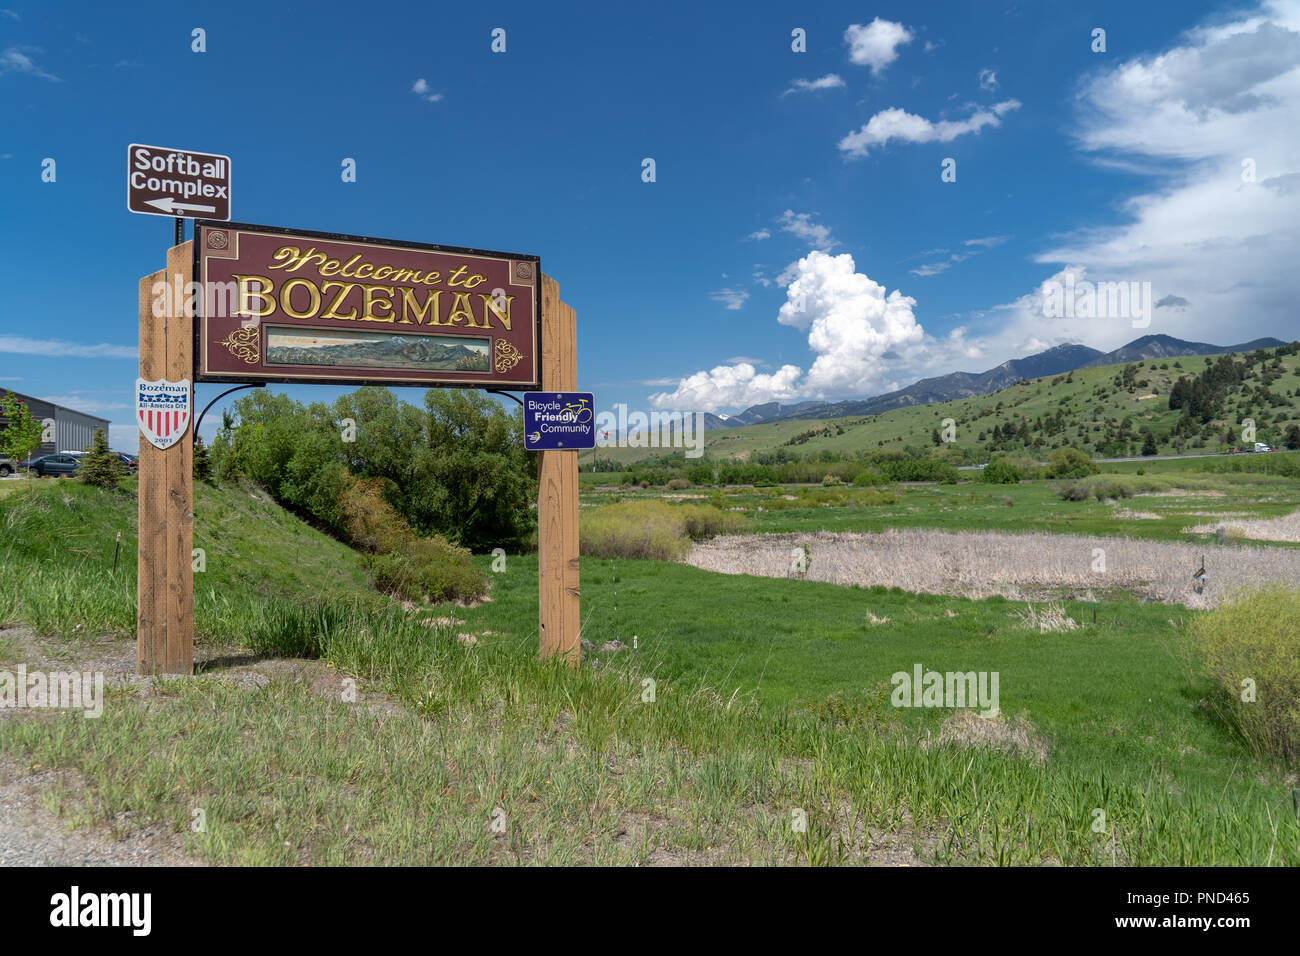 MAY 30 2017 - BOZEMAN, MT: Sign welcomes visitors to the town of Bozeman Montana on a sunny spring day Stock Photo